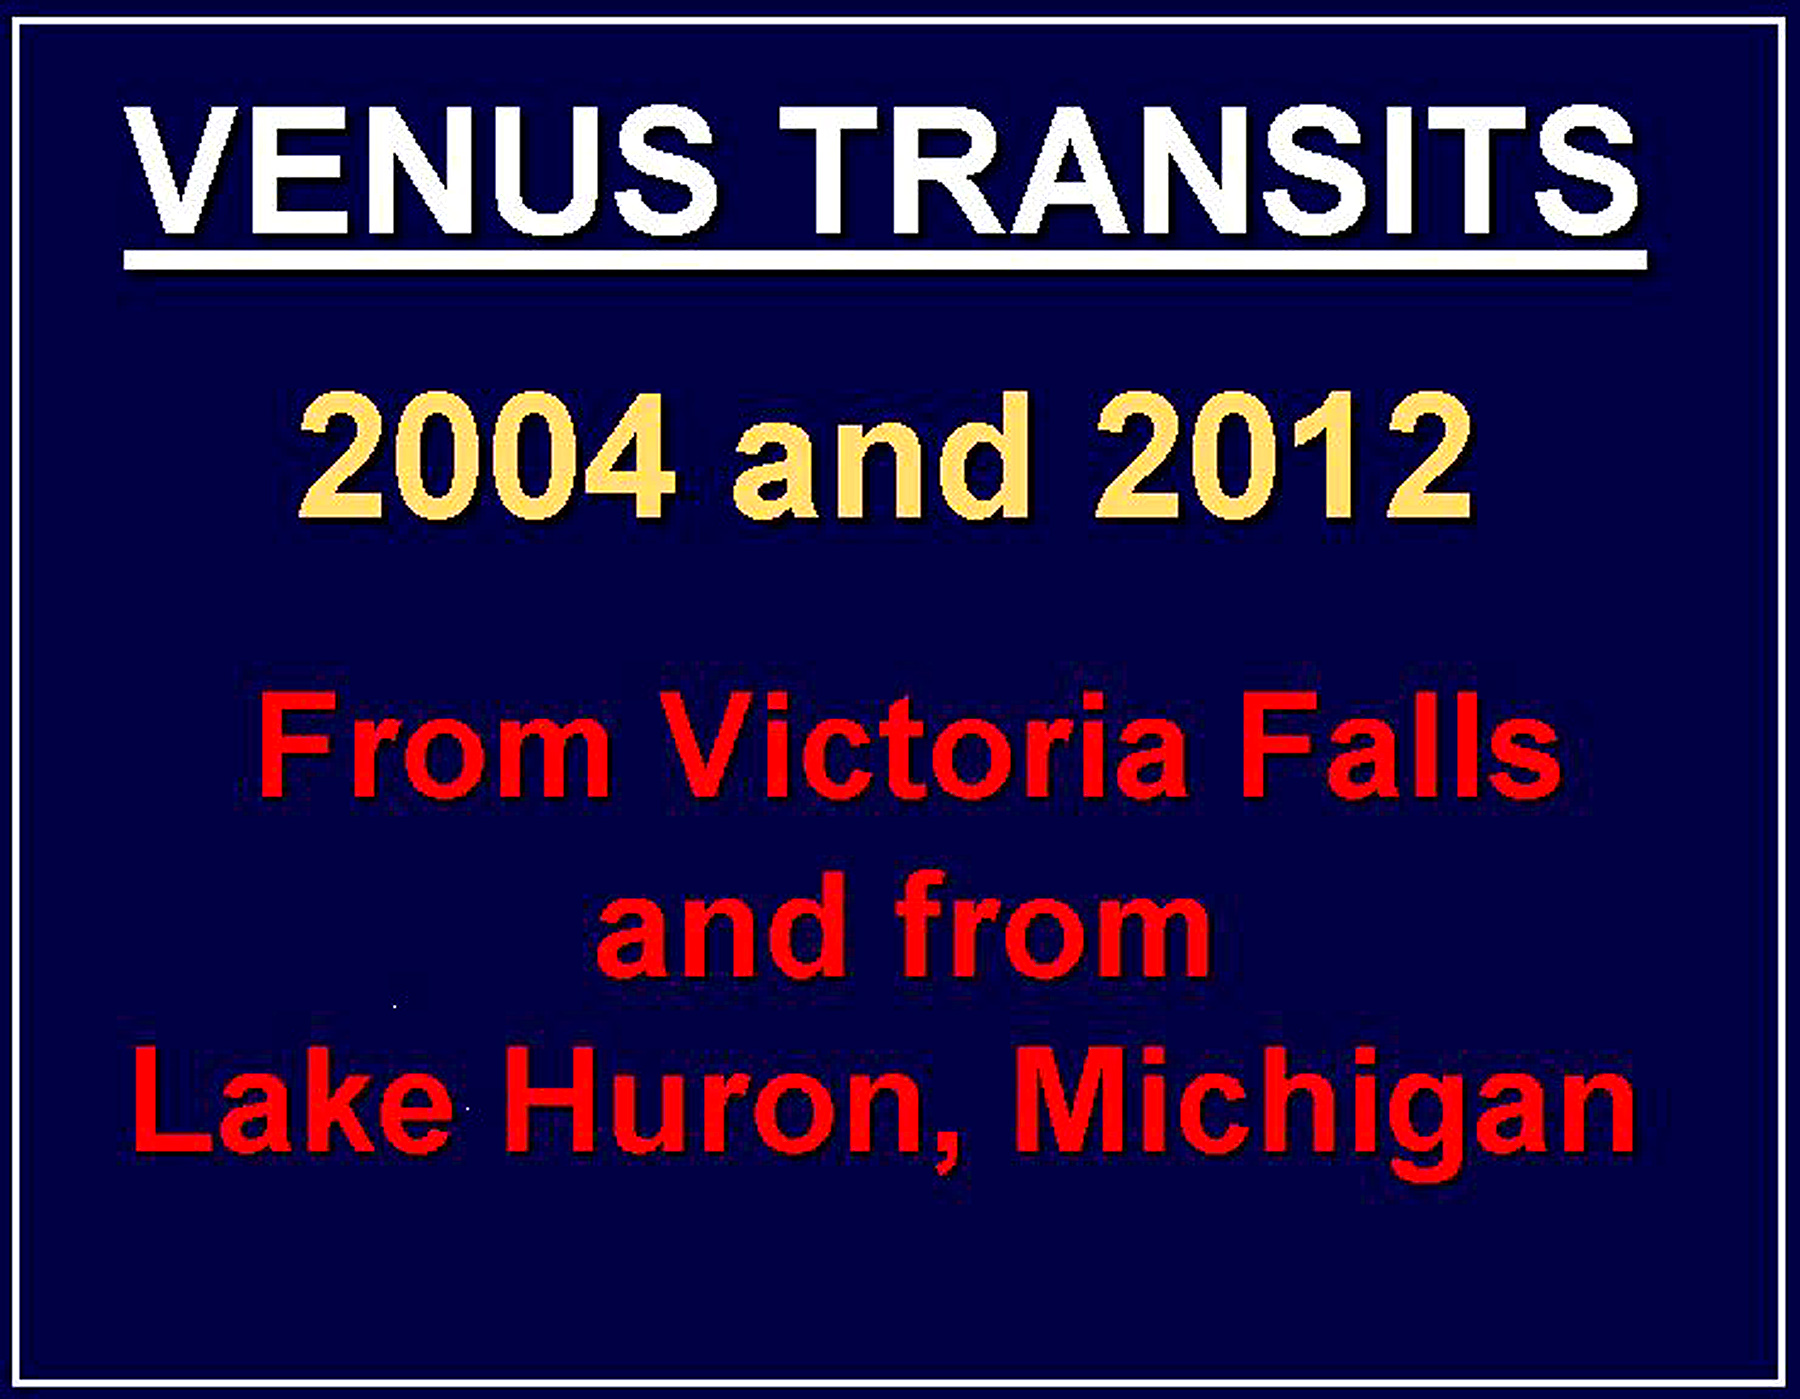 Eclipse 2004 - AA1 - Title Slide 2004 and 2012 Transits